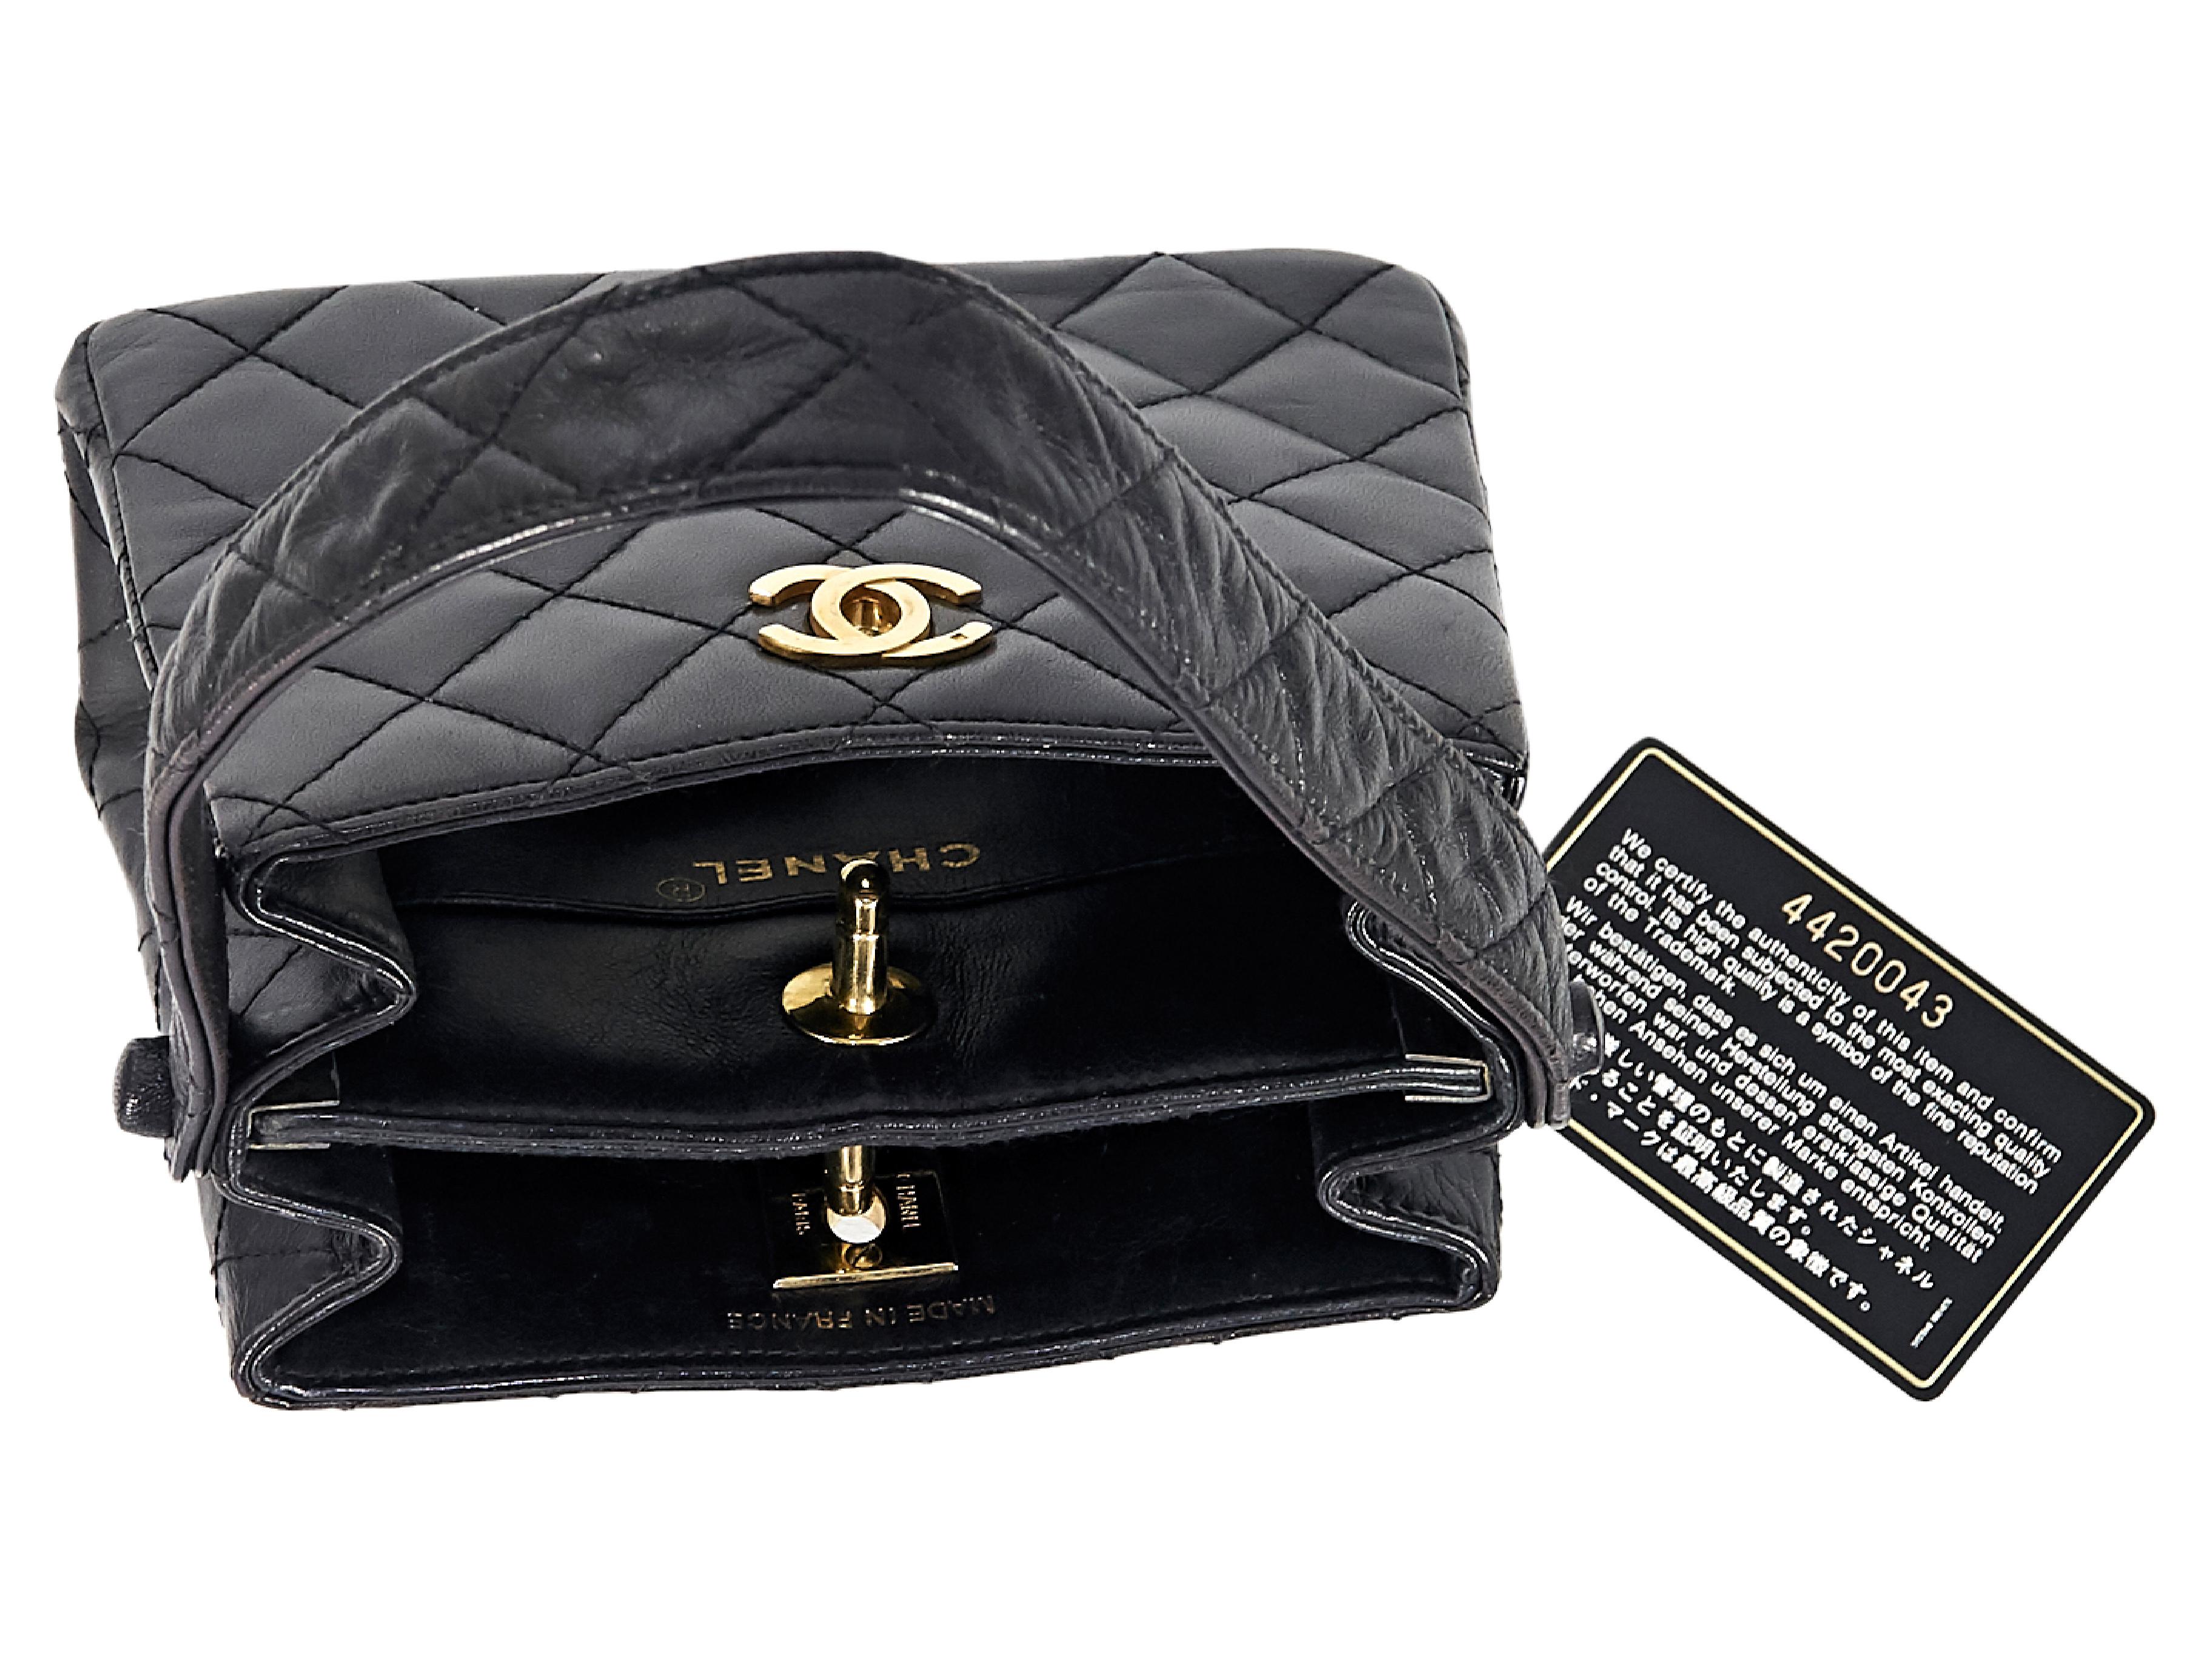 Women's Chanel Black Quilted Leather Mini Evening Bag